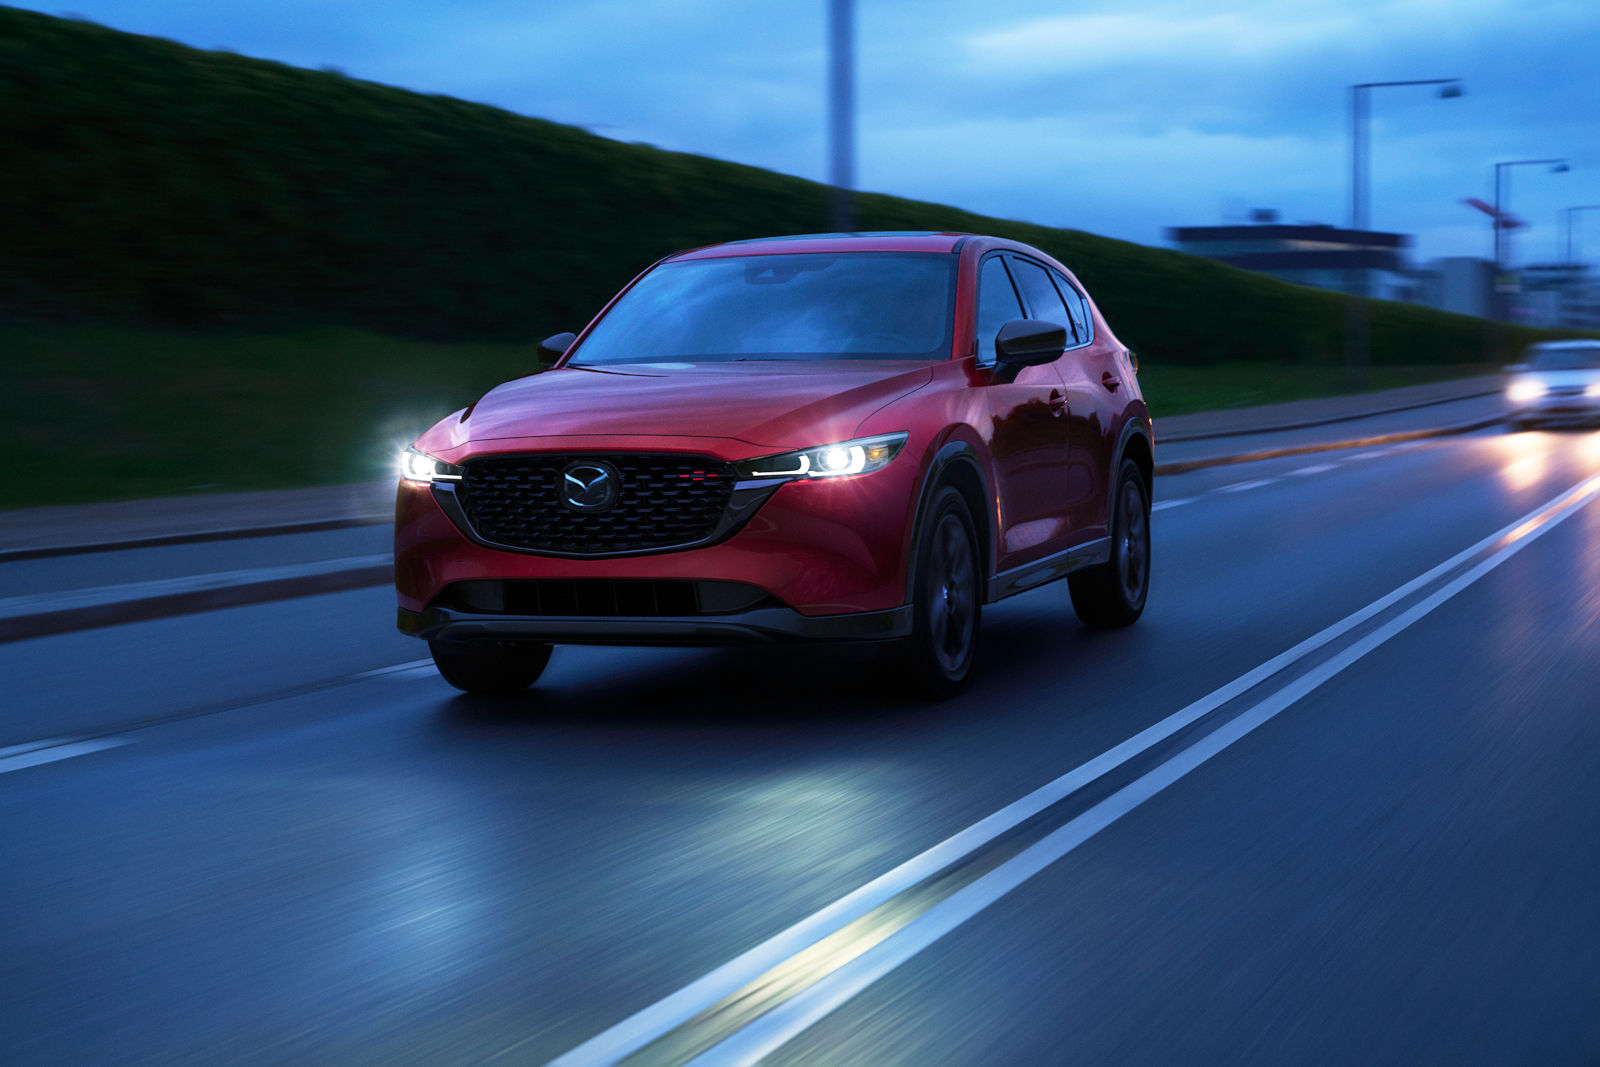 How does the 2023 Mazda CX-5 Compare to the 2023 Honda CR-V?